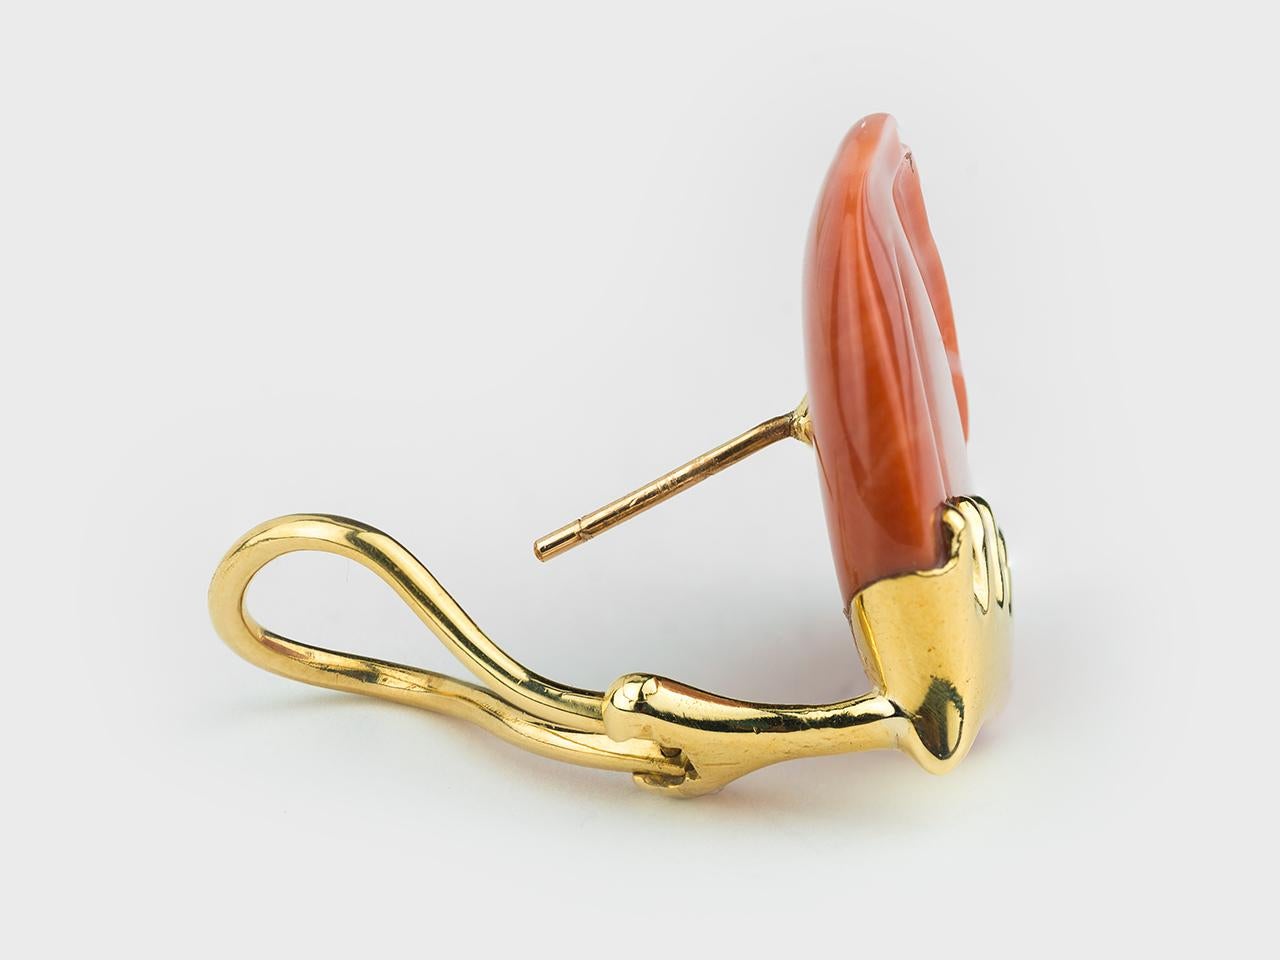 A pair of 18k and Coral earrings by Tiffany & Co.